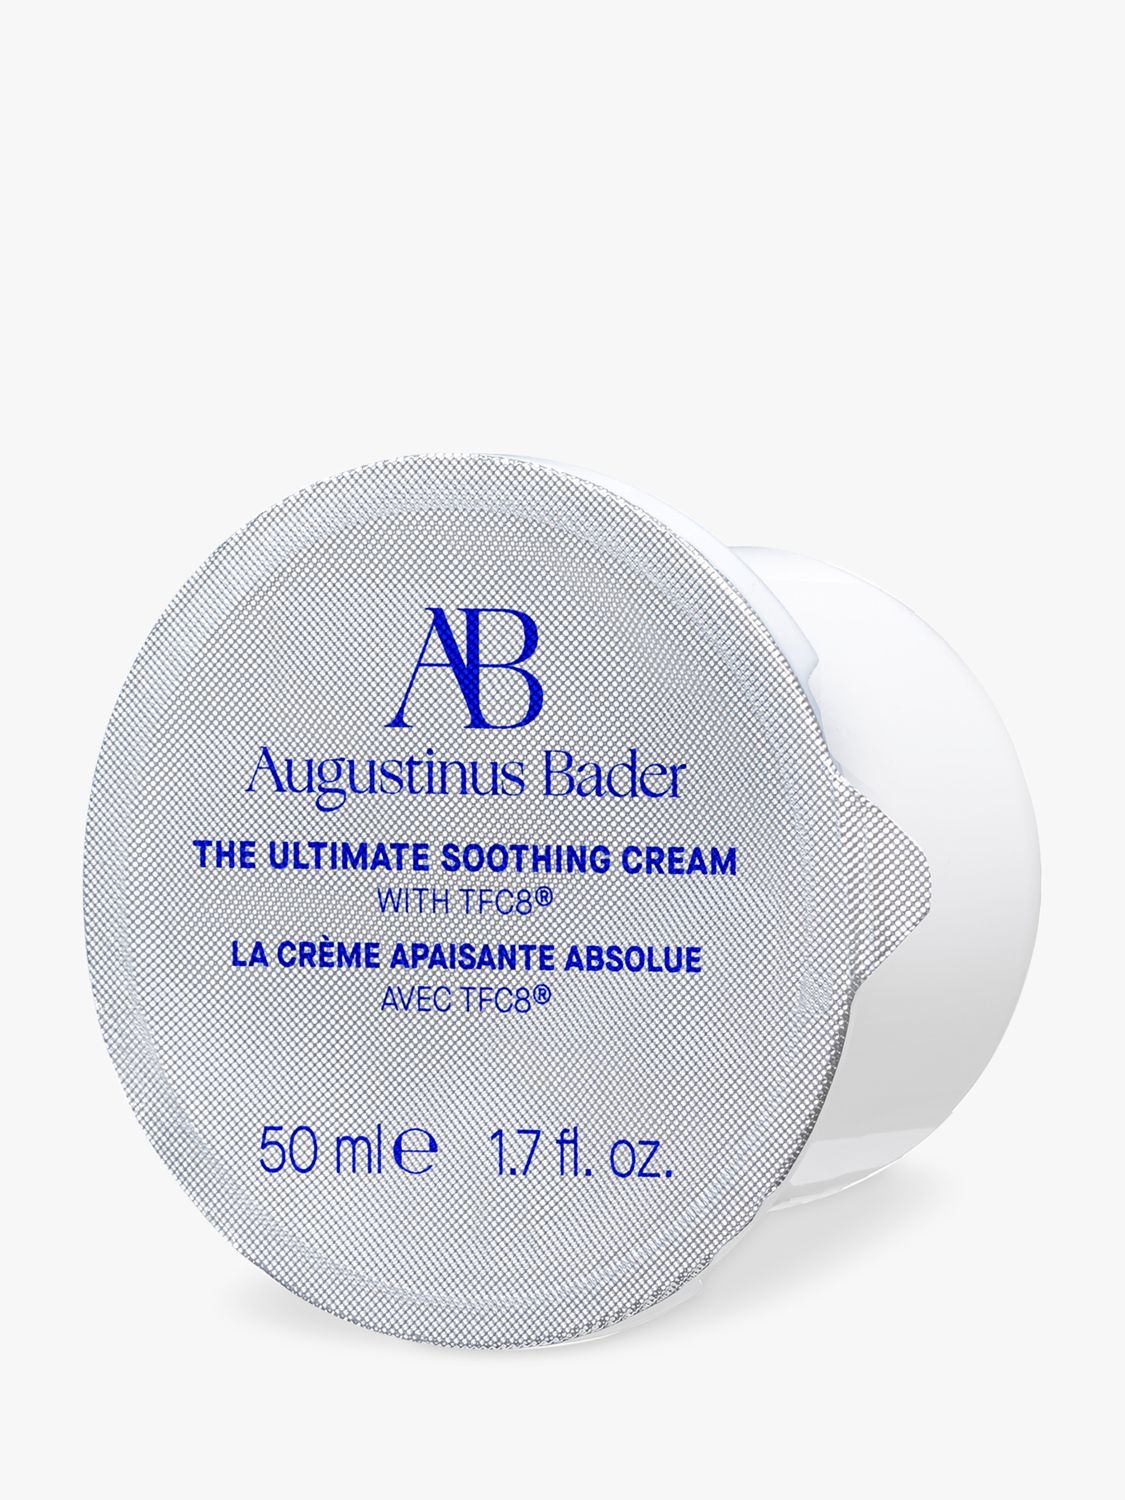 Augustinus Bader The Ultimate Soothing Cream, Refill, 50ml 2